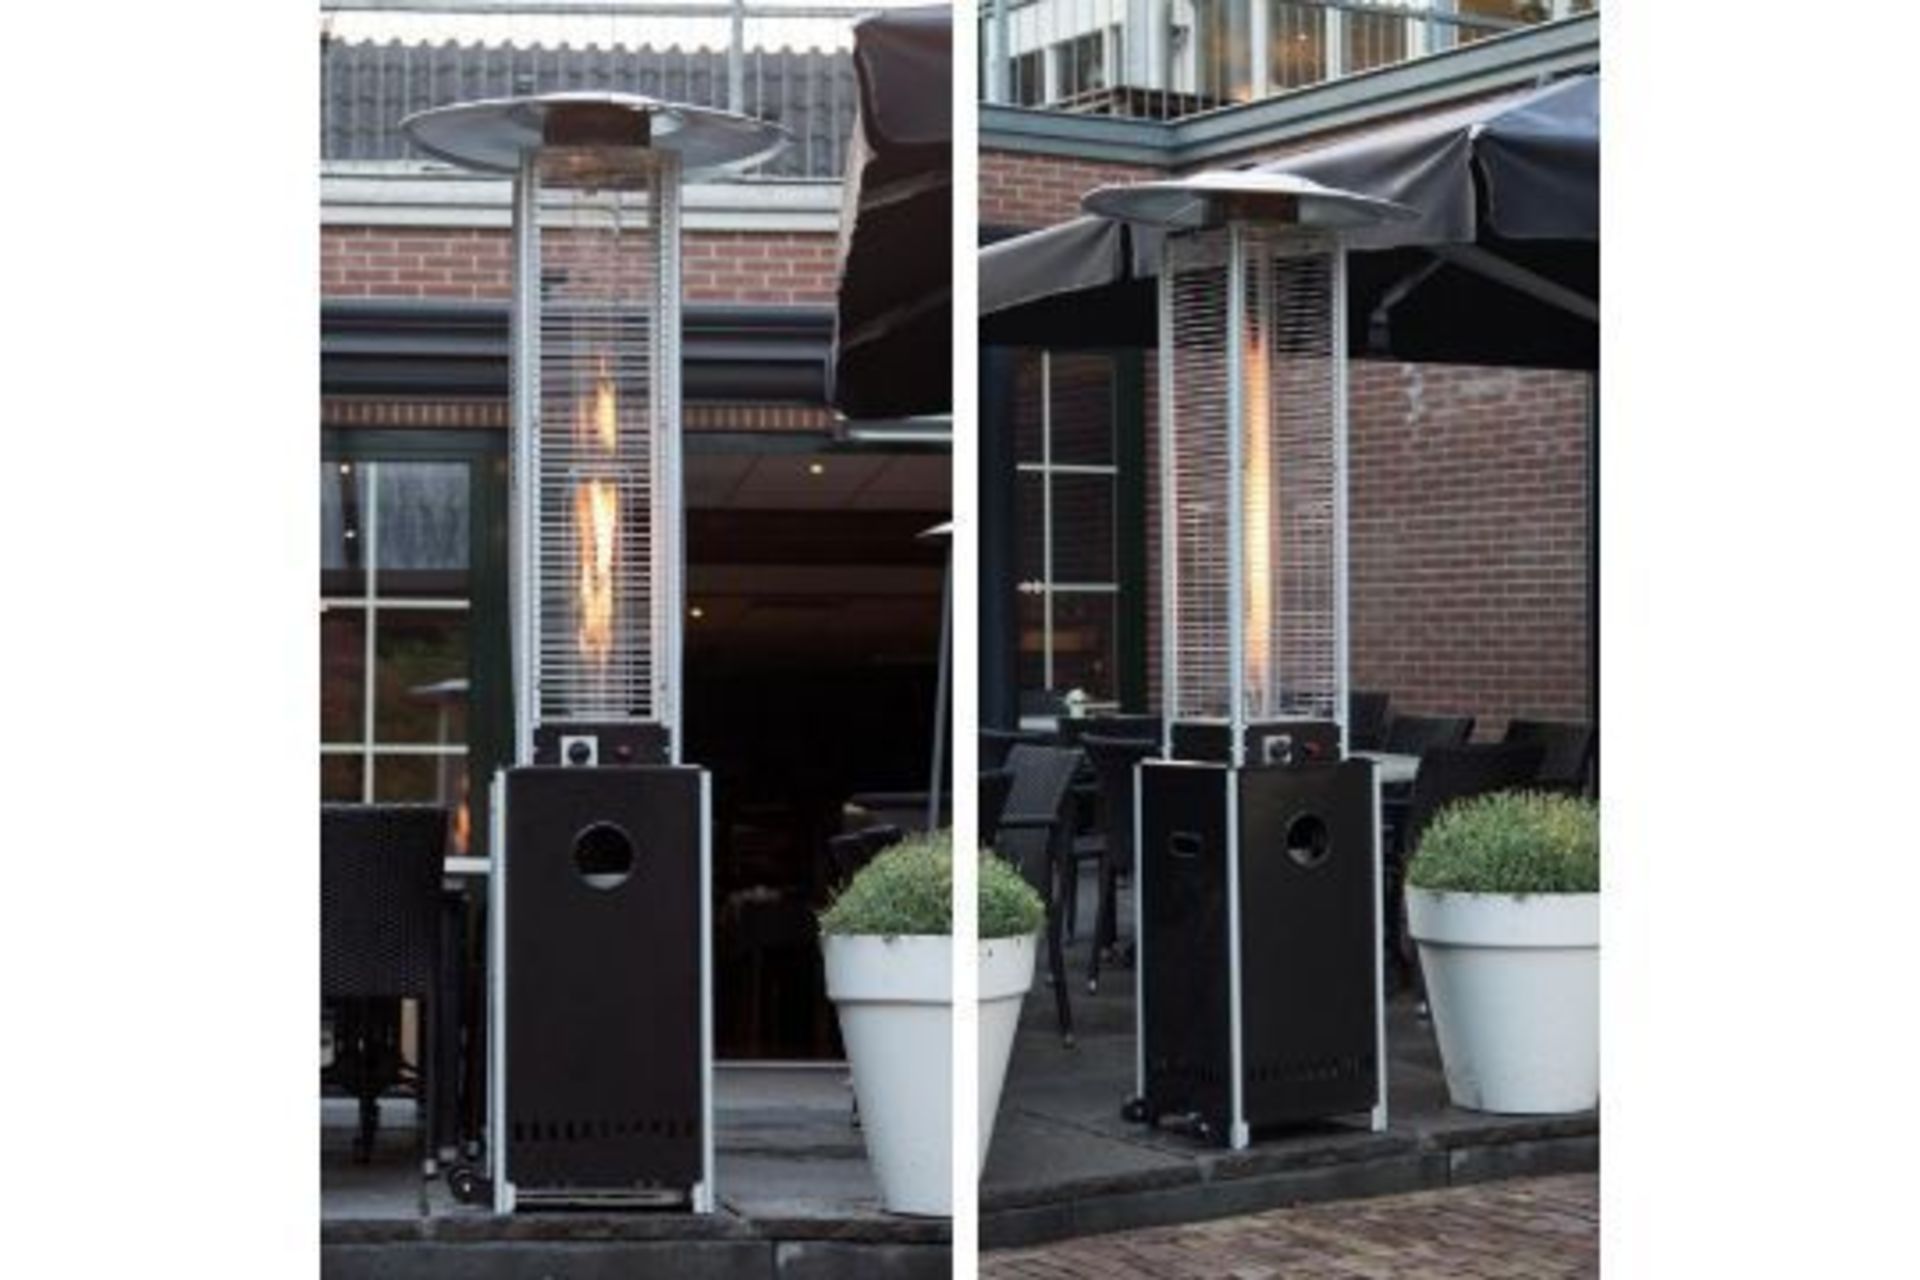 BRAND NEW SUNRED FLAMETORCH PATIO HEATER RRP £559. UPTO 12000 WATT, WITH WHEELS, WITH HOHSE AND